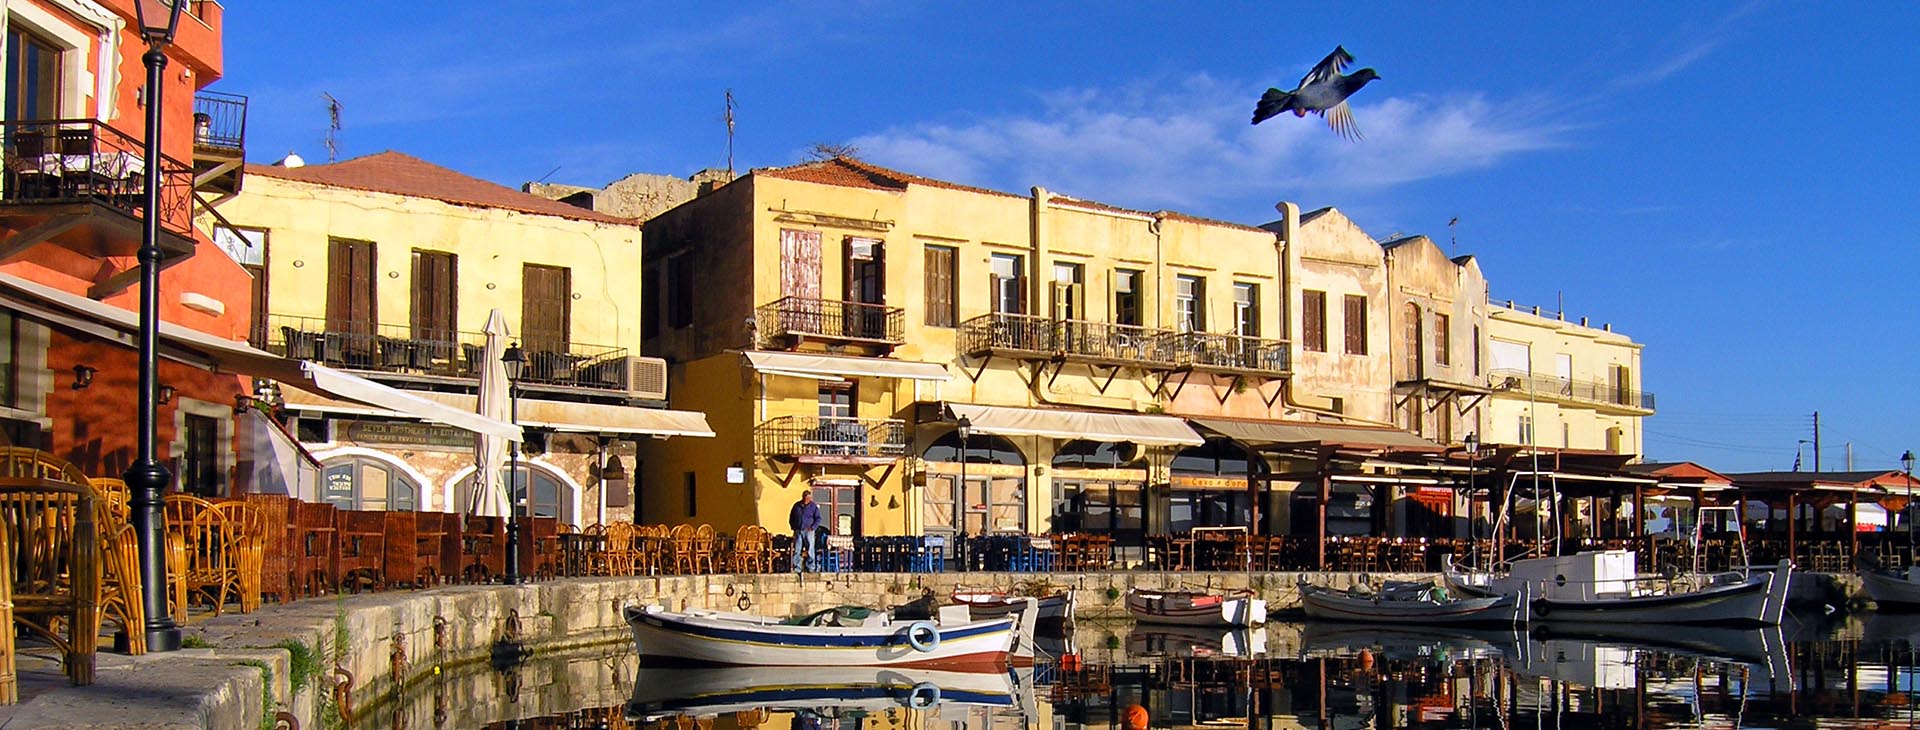 Town of Rethymnon: The old harbour